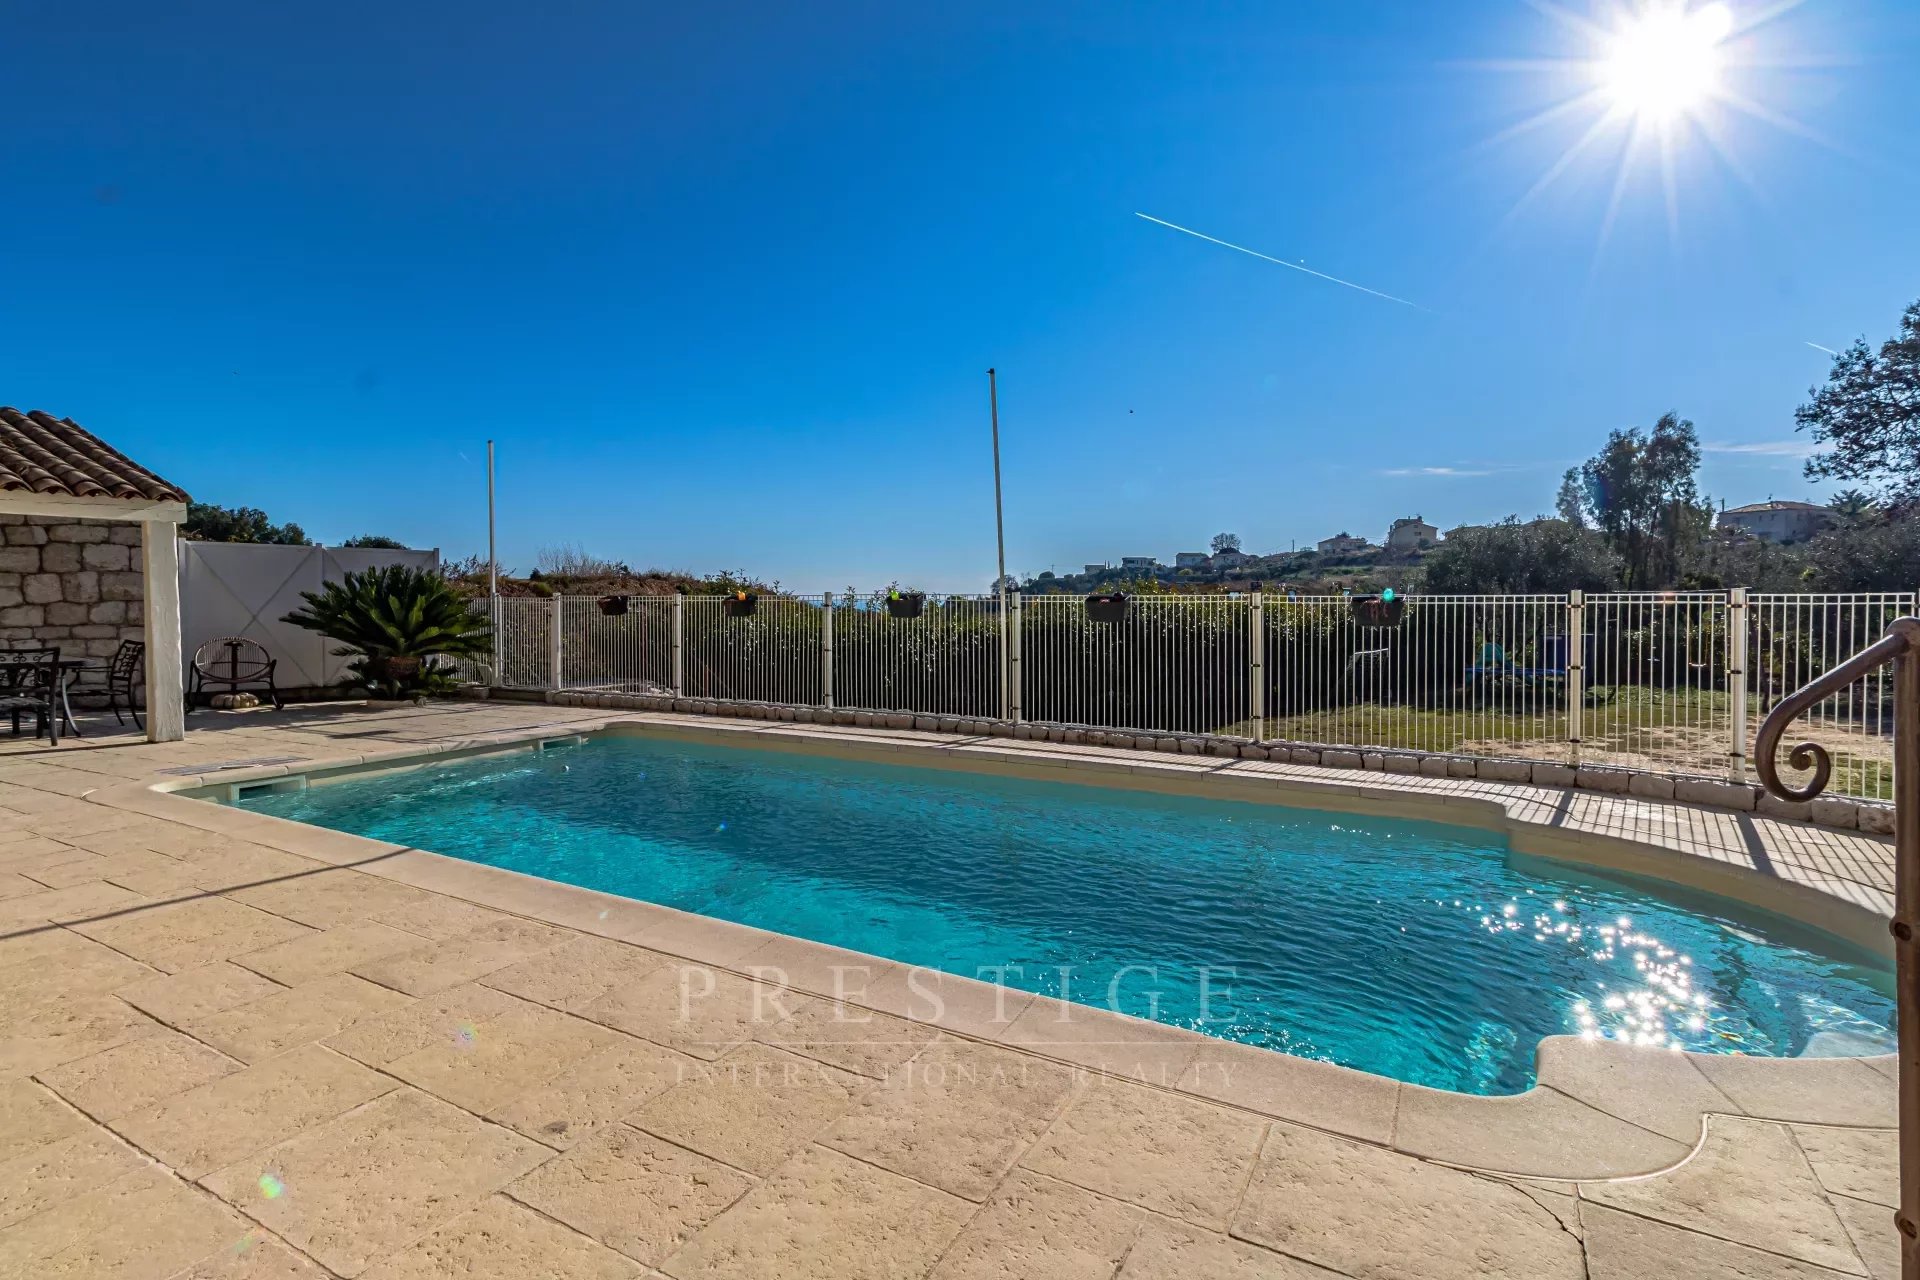 Cagnes sur mer, 146sqm house sea view, private pool